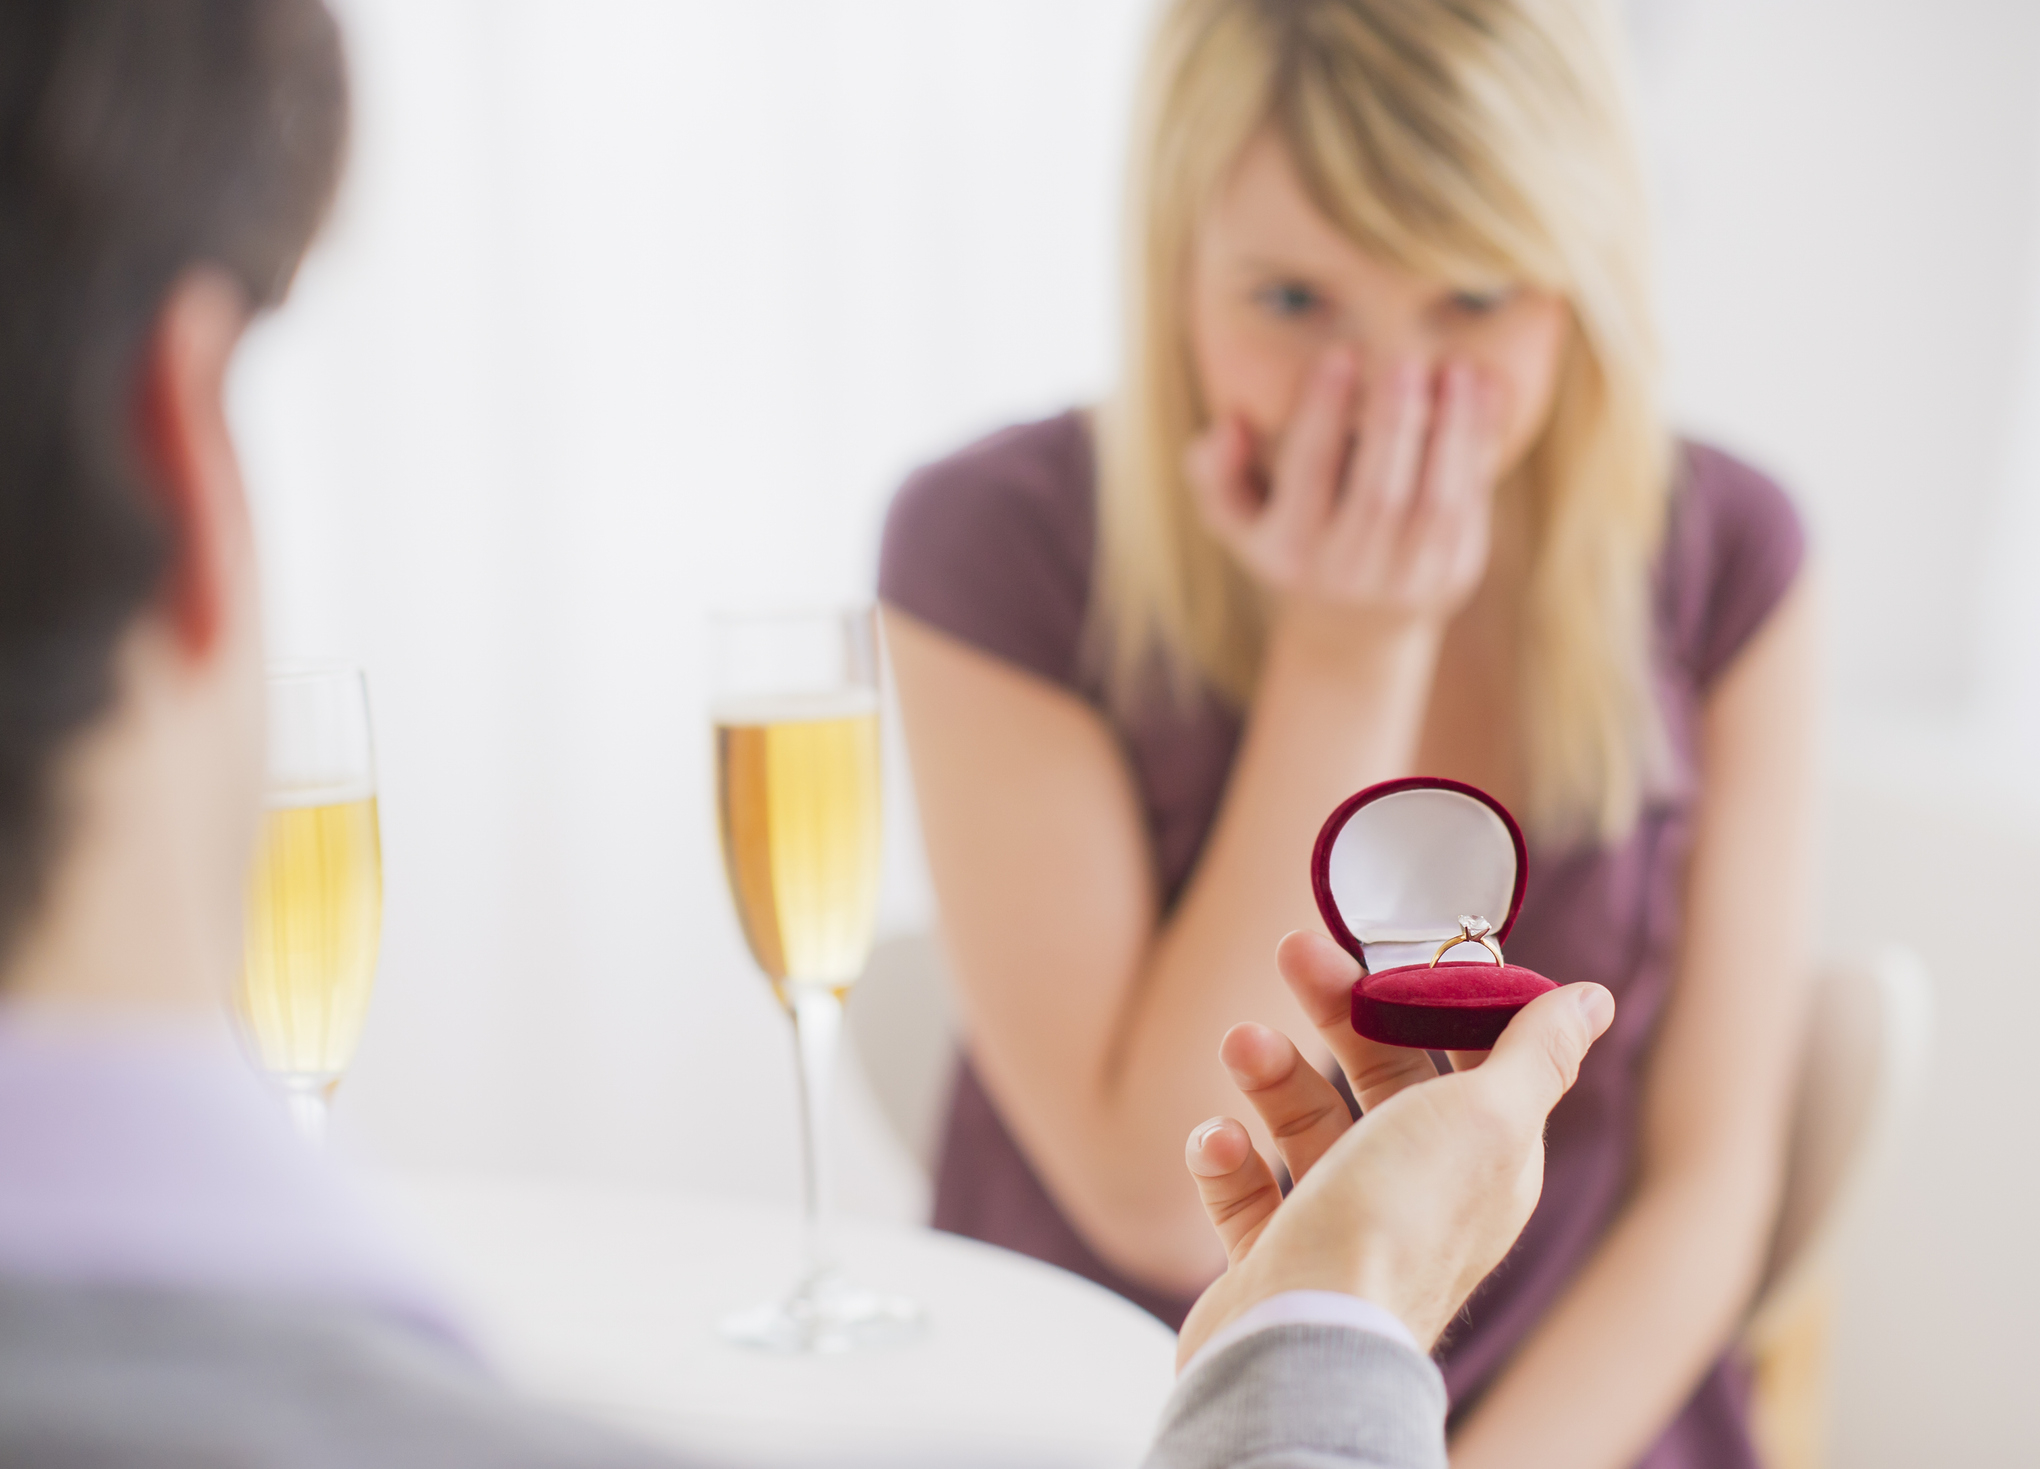 Man proposing to a woman with a ring, both seated with champagne glasses on table. Woman is emotionally covering her face